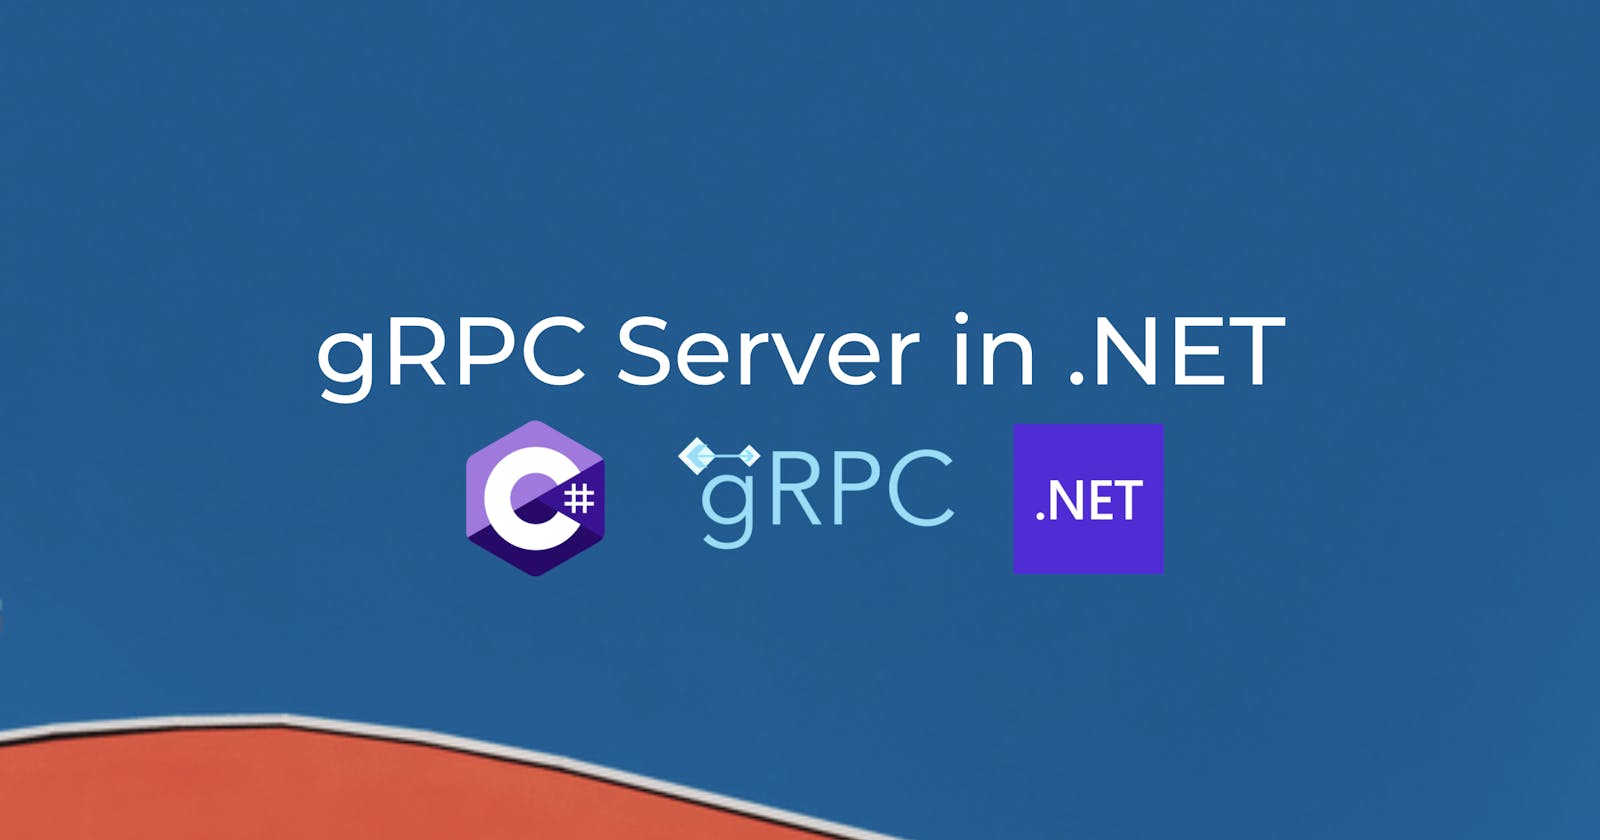 Building a gRPC Server in .NET